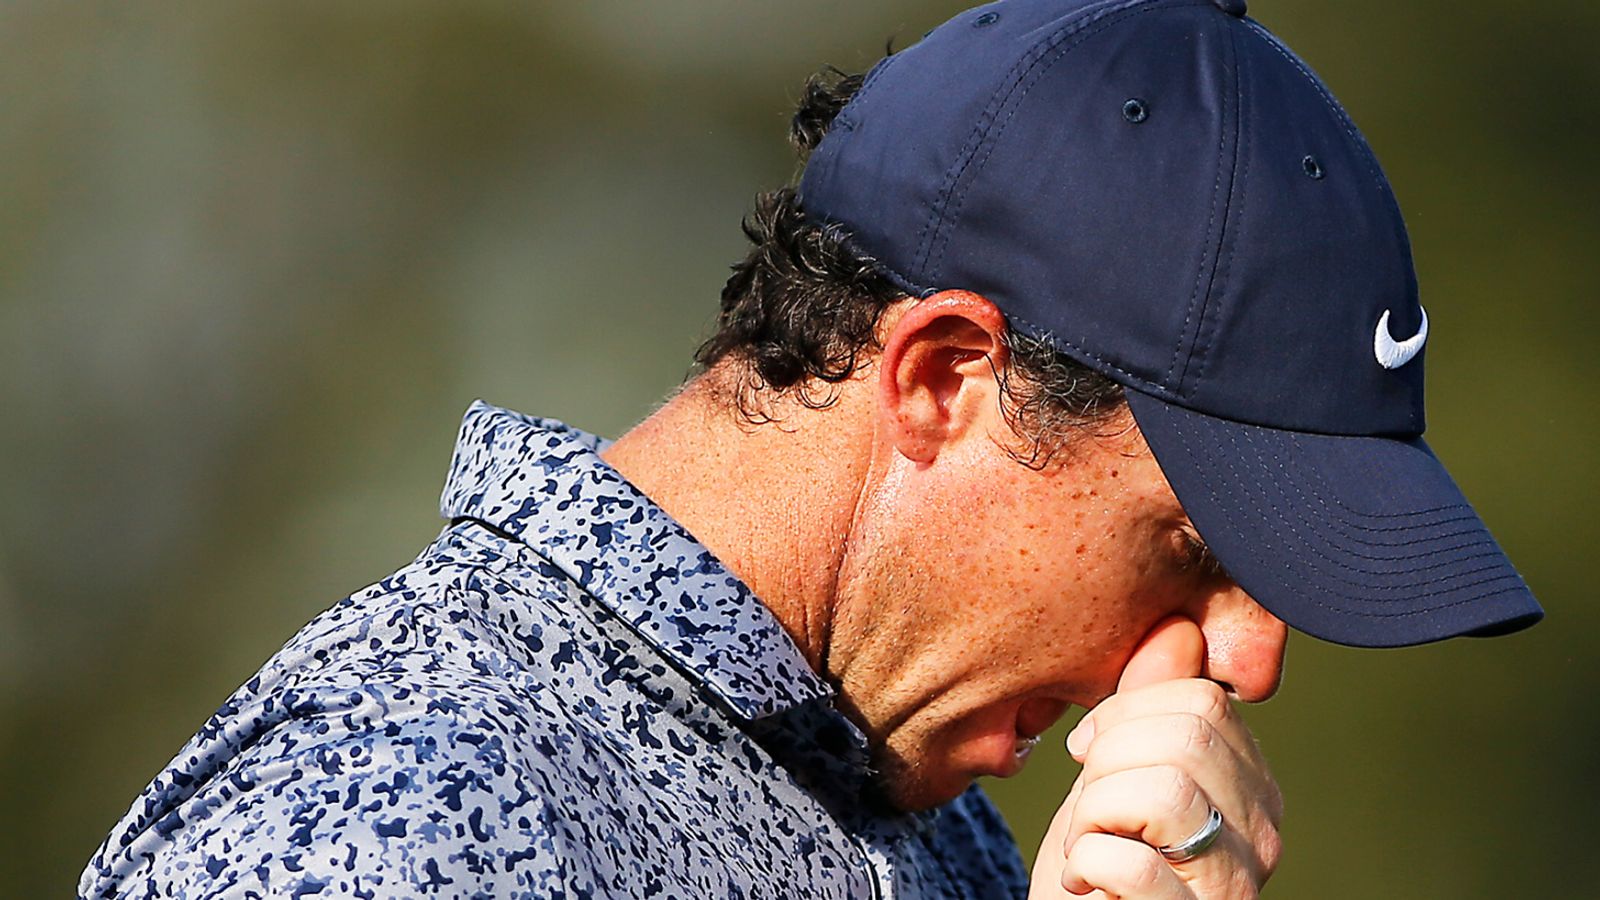 Rory McIlroy takes positives into The Players but rues missed chances after runner-up finish at Bay Hill